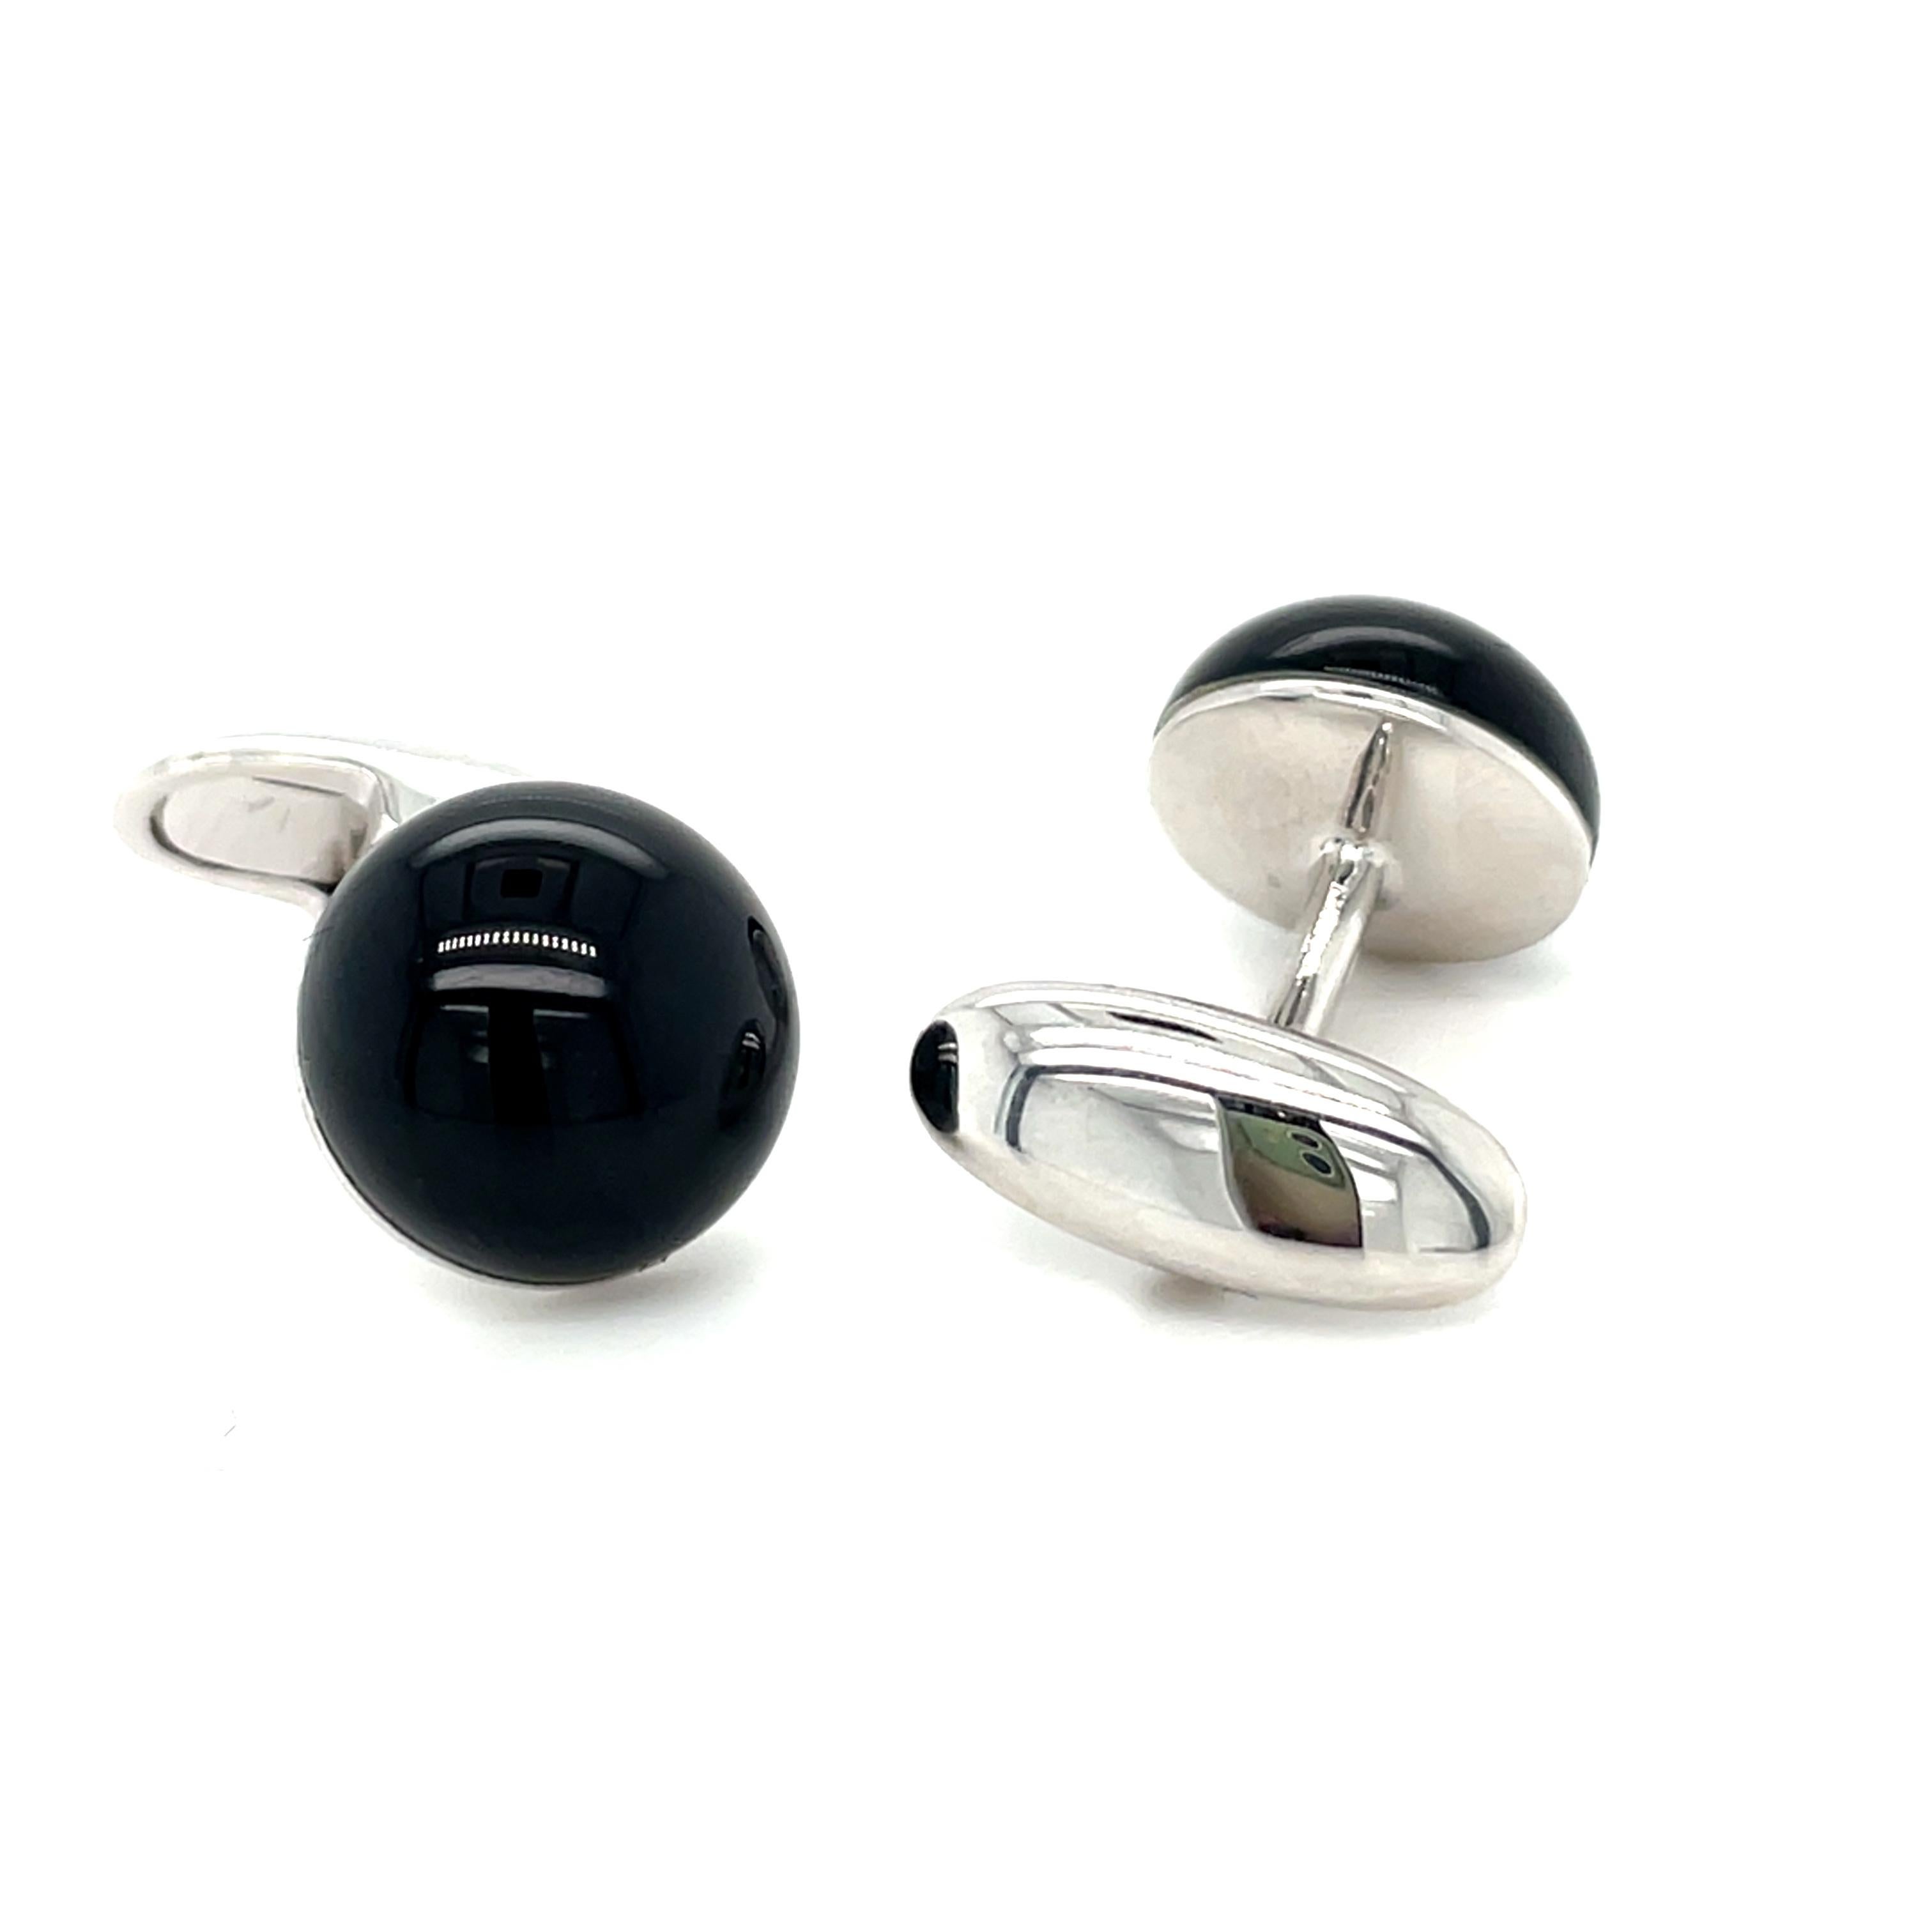 These 18K white gold cufflinks are from timeless Collection. These very elegant cufflinks are made with  white gold and onyx in total of 5.50 Carat. Total metal weight is 8.80 gr. These cufflinks are a perfect upgrade to every  occasion.

This